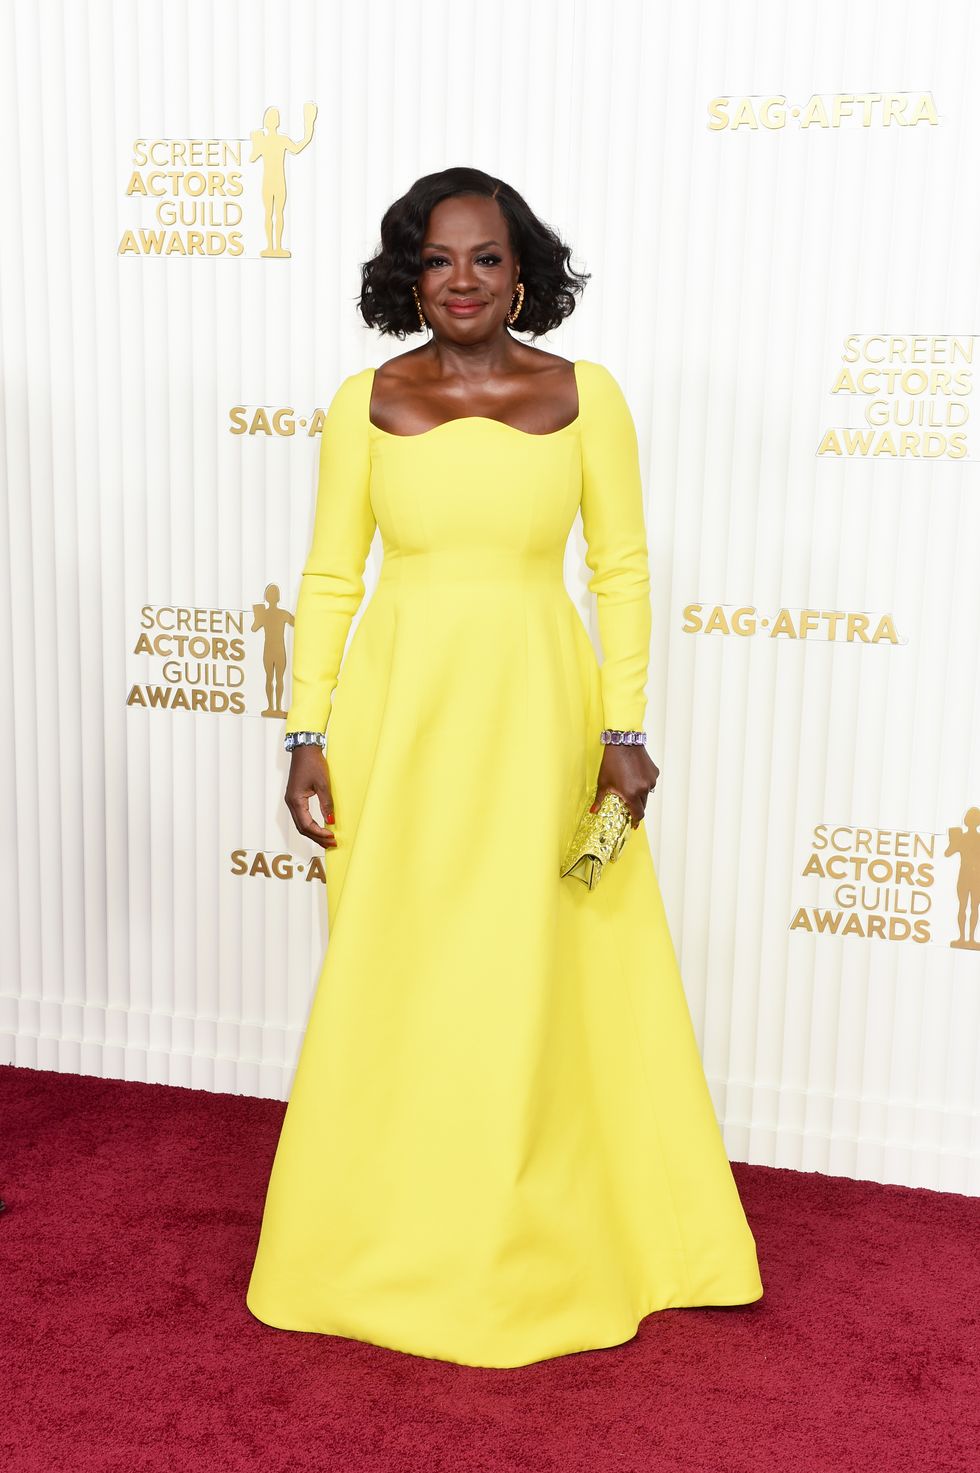 viola davis at the 29th annual screen actors guild awards held at the fairmont century plaza on february 26, 2023 in los angeles, california photo by gilbert floresvariety via getty images